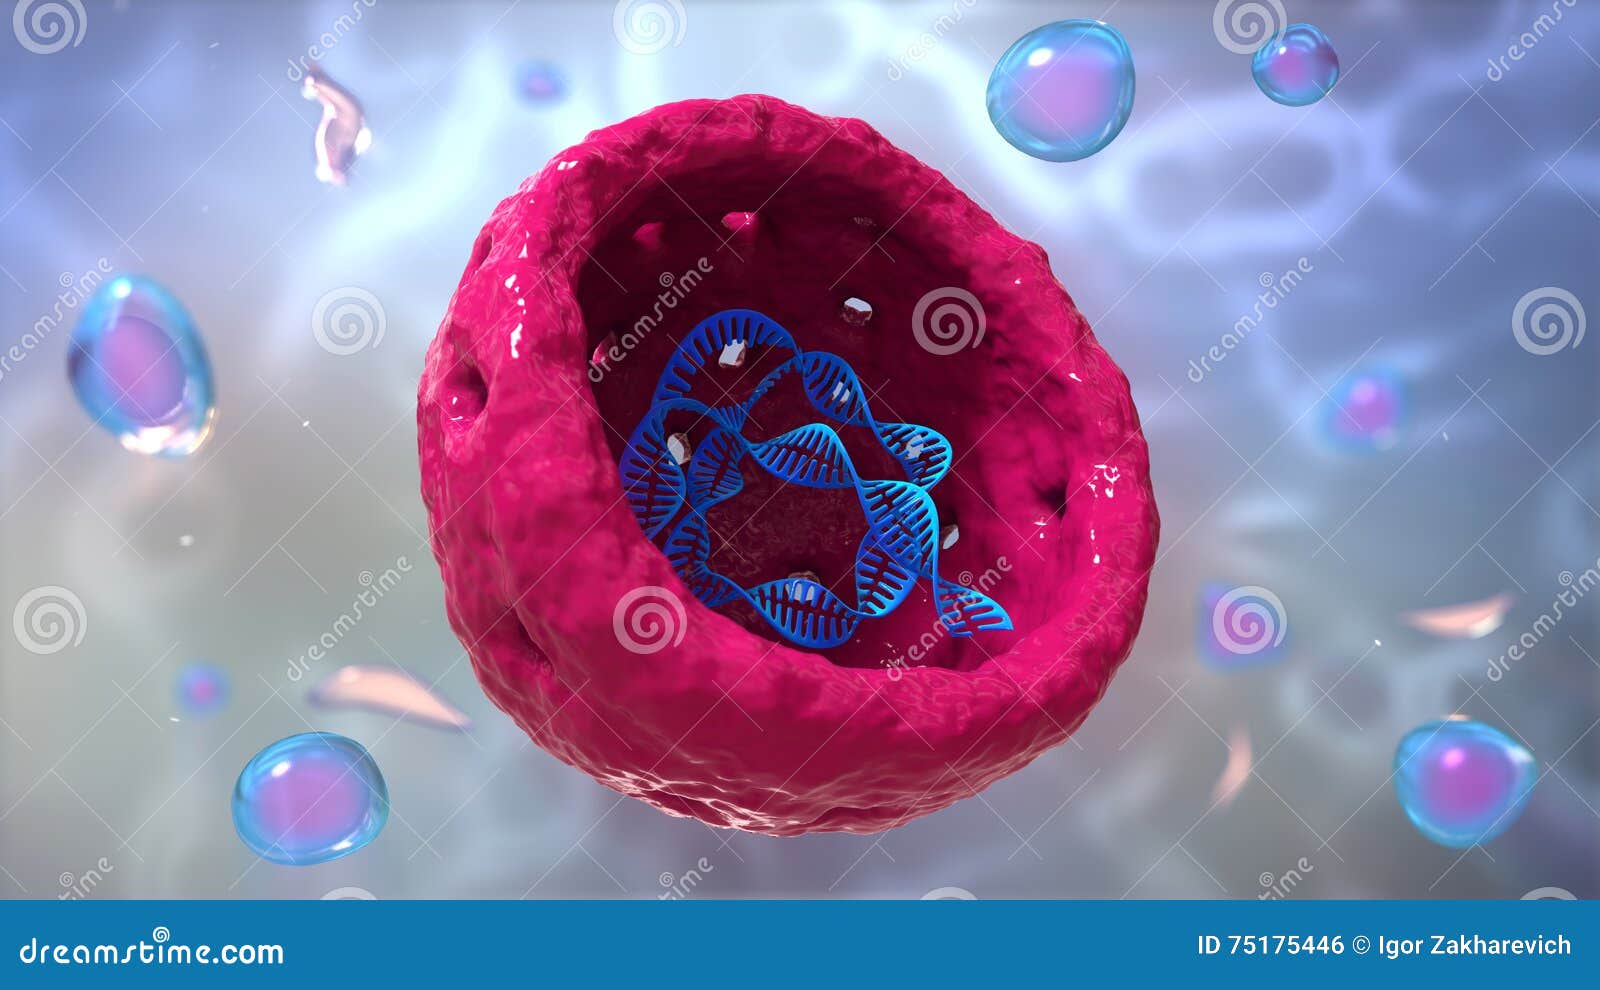 nucleus, nucleolus, human body cell.